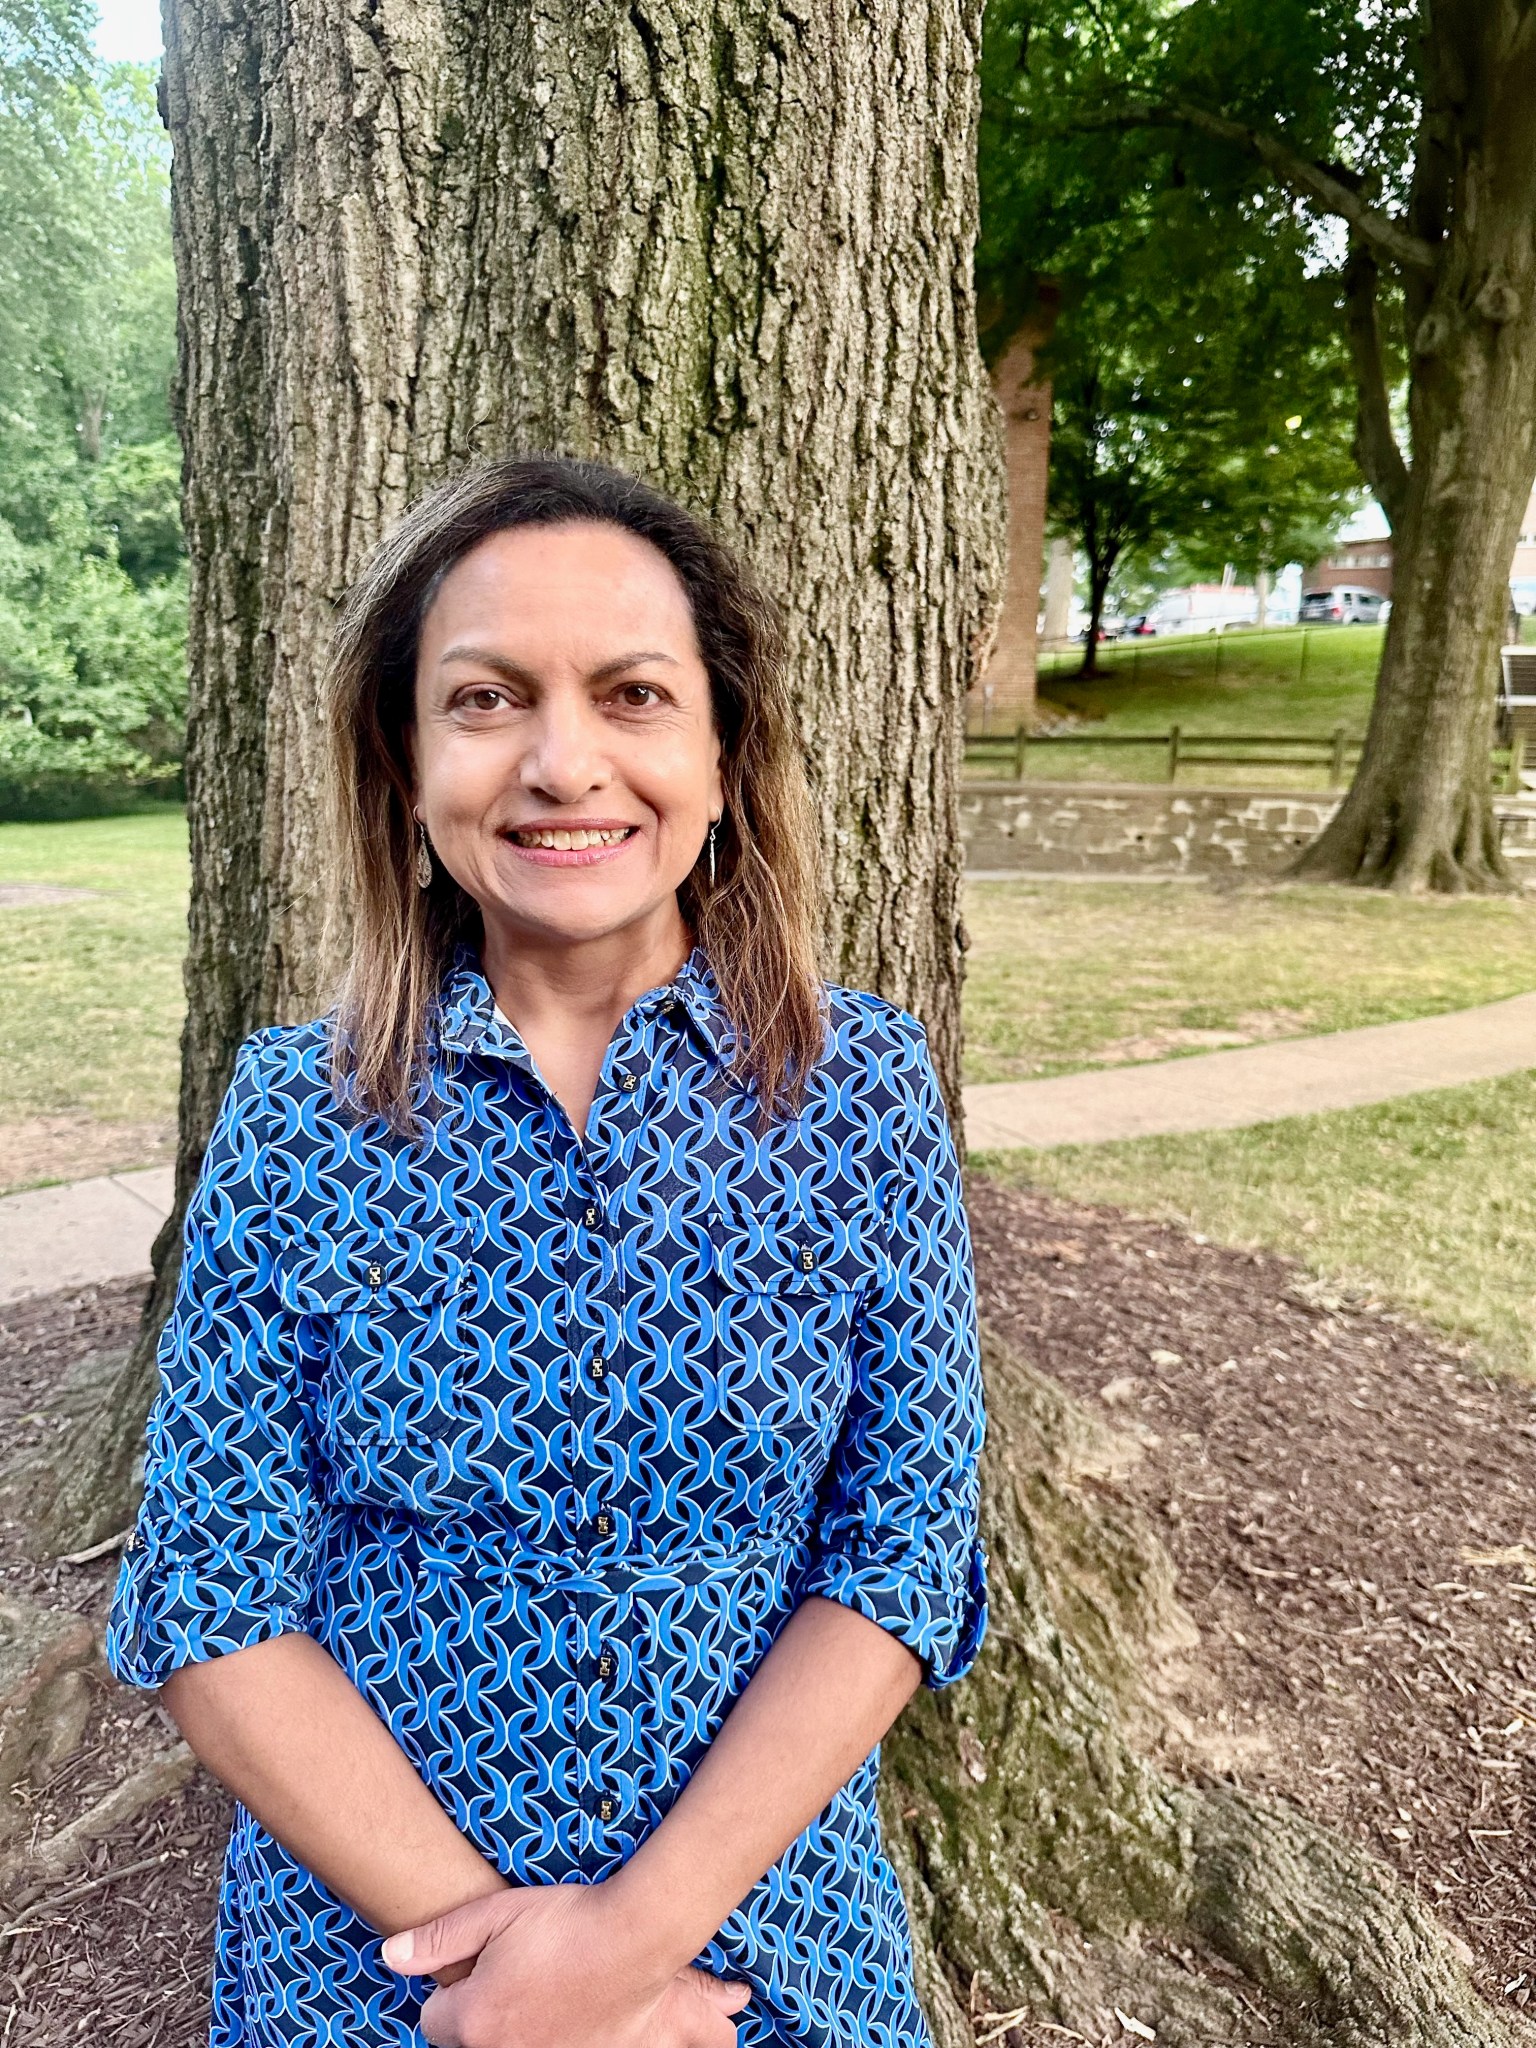 Rita Owens, a woman with shoulder-length, light brown hair, smiles at the camera in a casual outdoor portrait. She wears a patterned blue dress and stands in front of a tree. More green trees, a stone wall and brick buildings with cars are visible in the background.